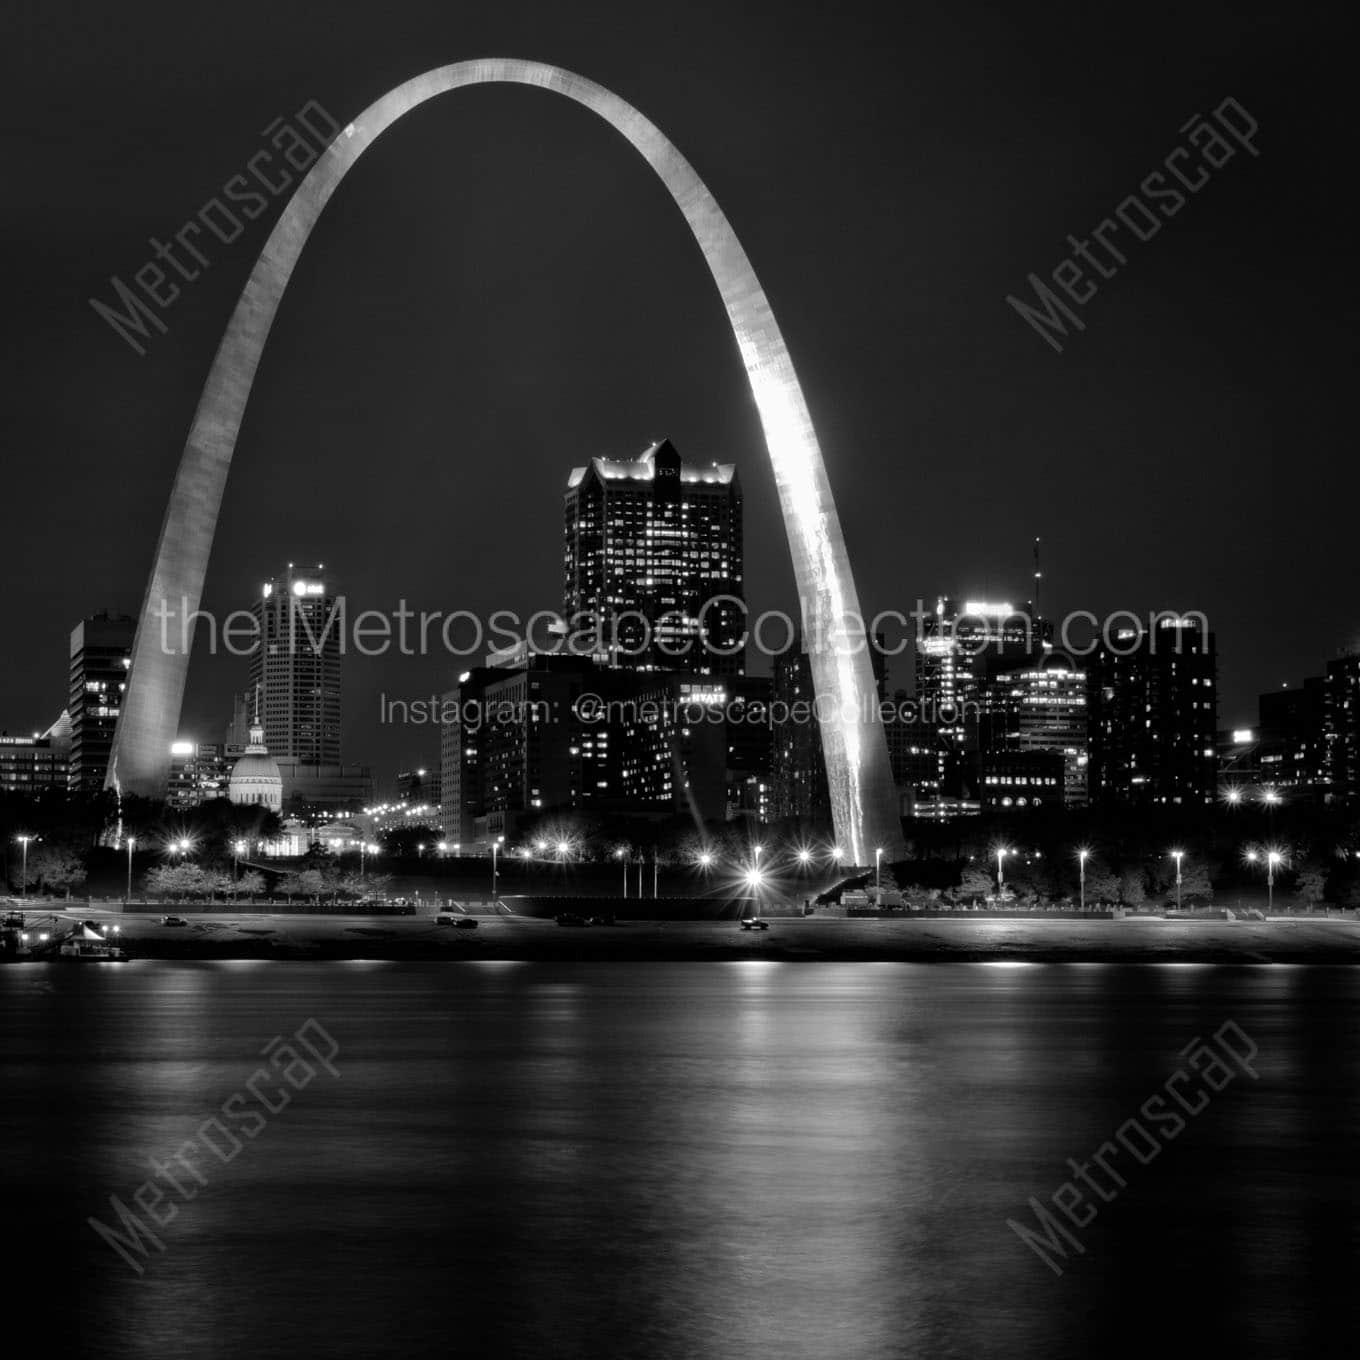 st louis arch at night Black & White Office Art